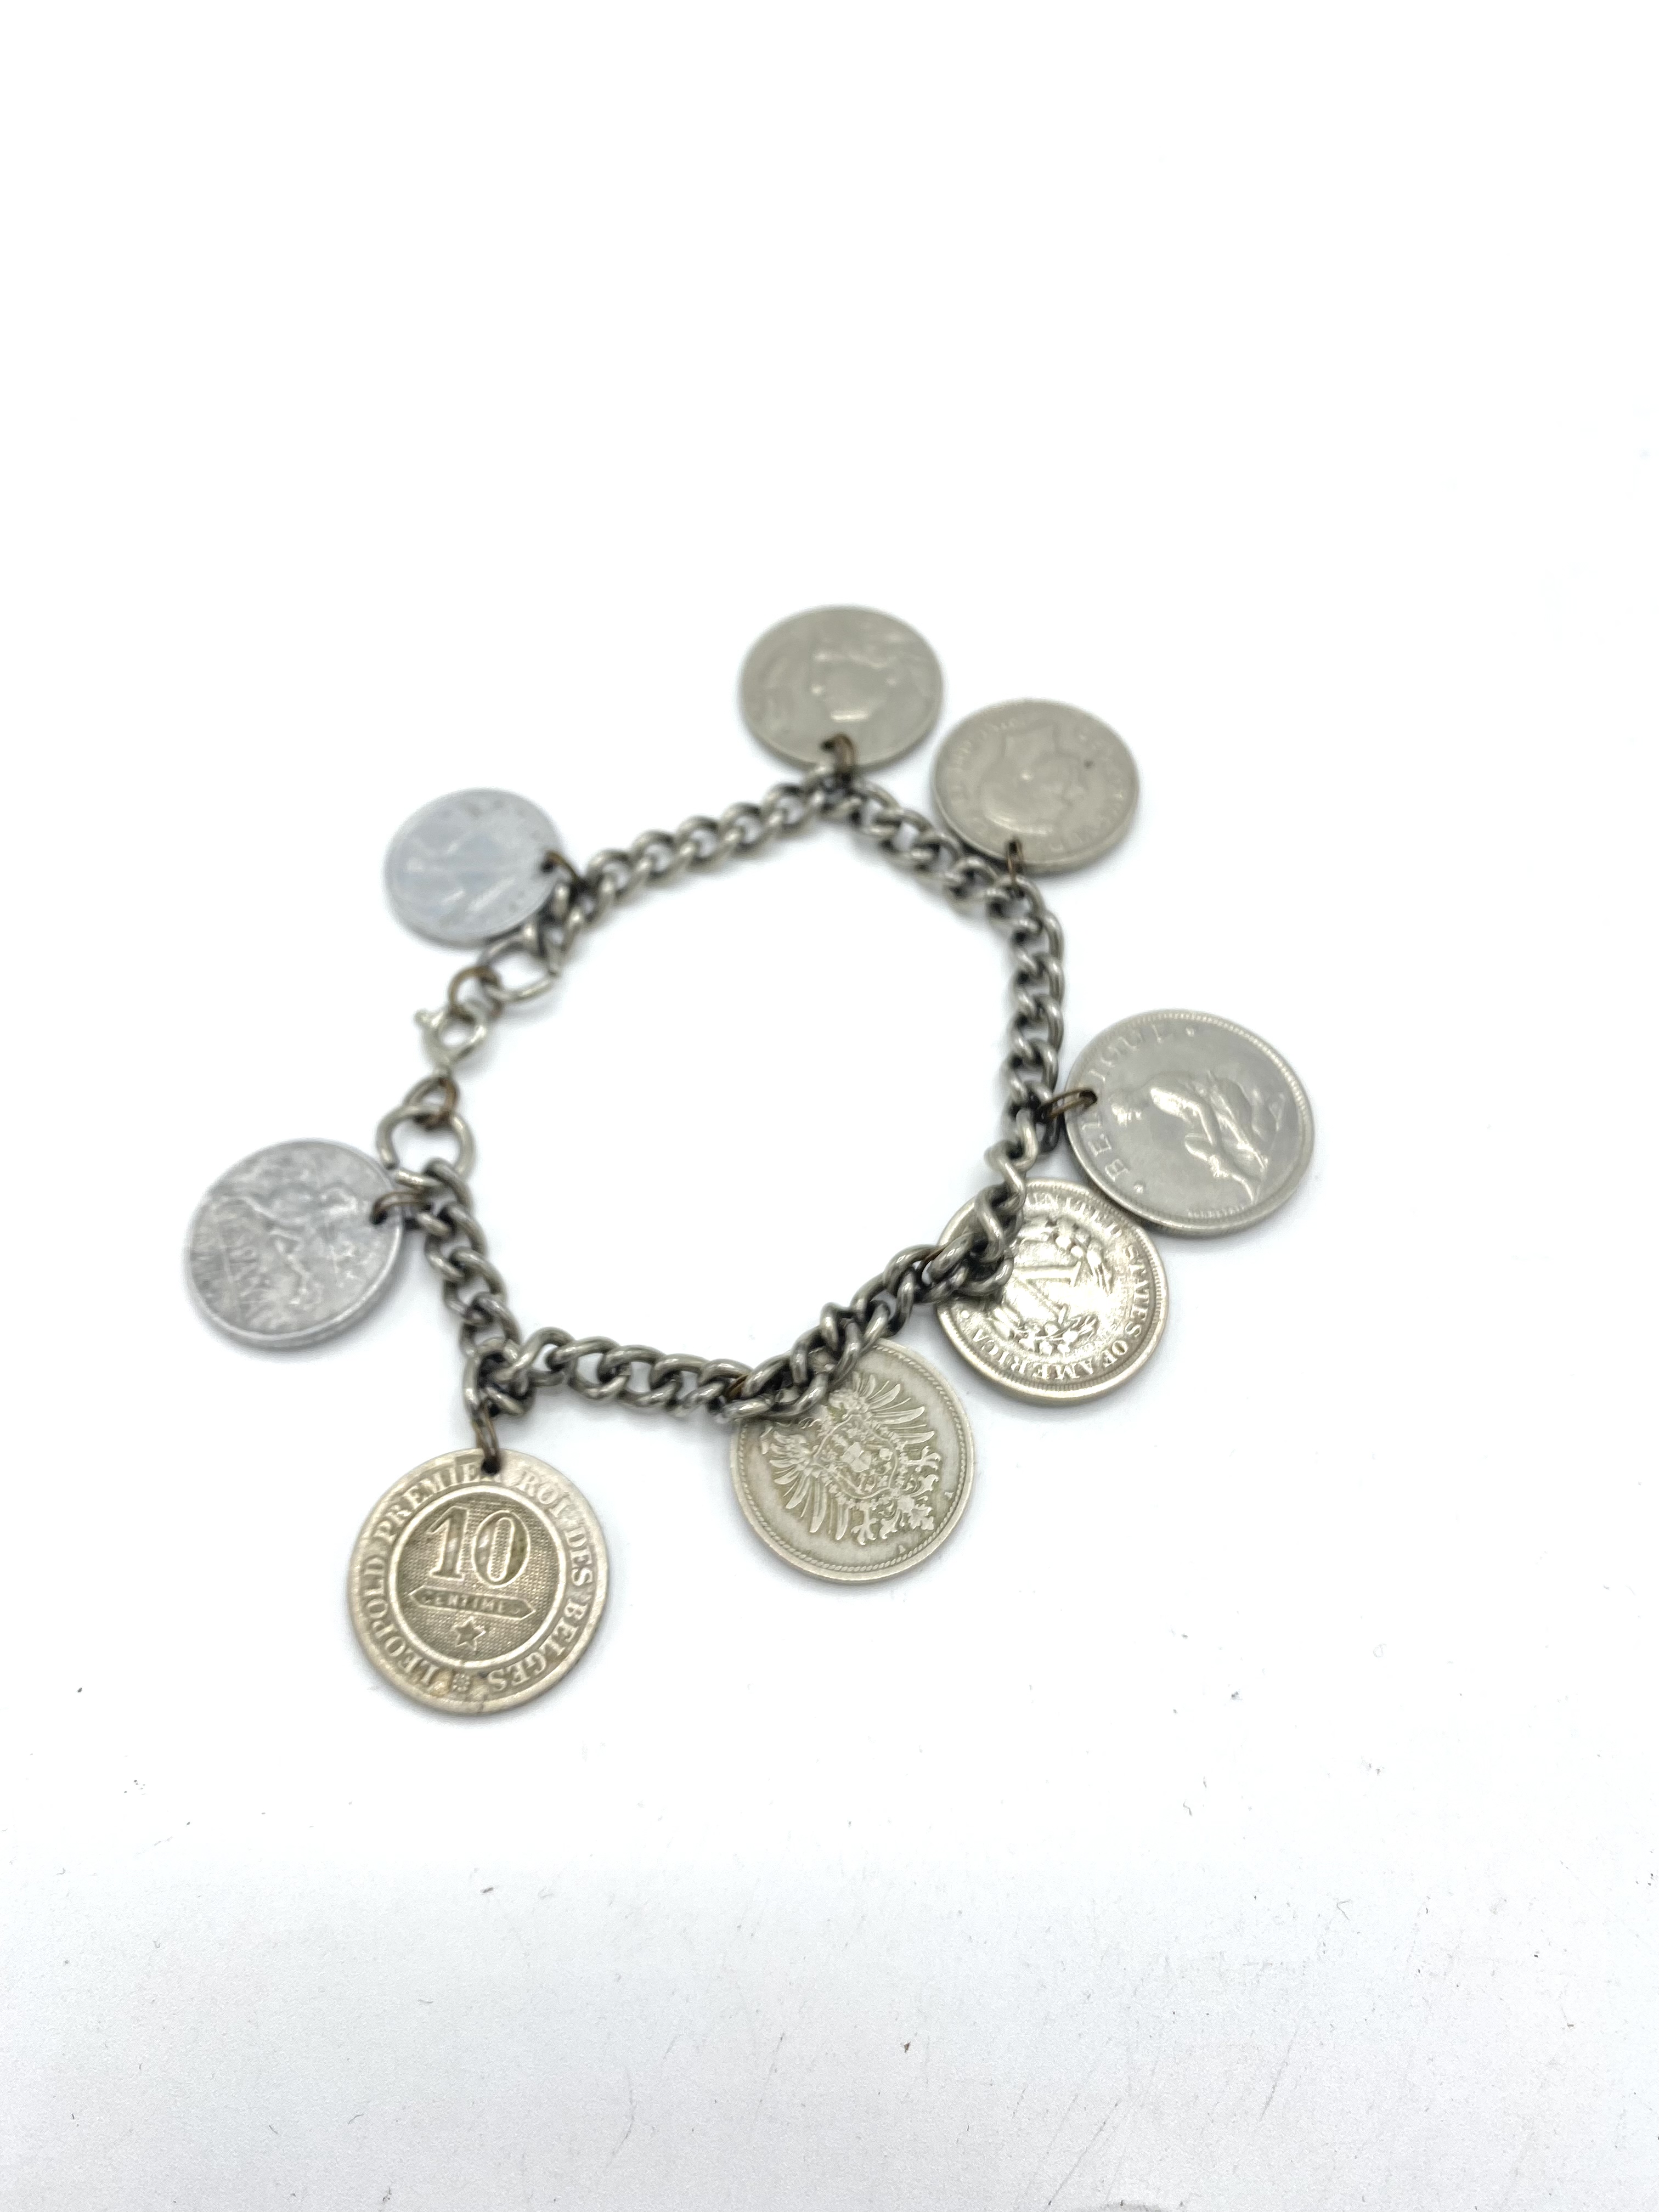 Hallmarked silver charm bracelet and two coin bracelets - Image 3 of 4